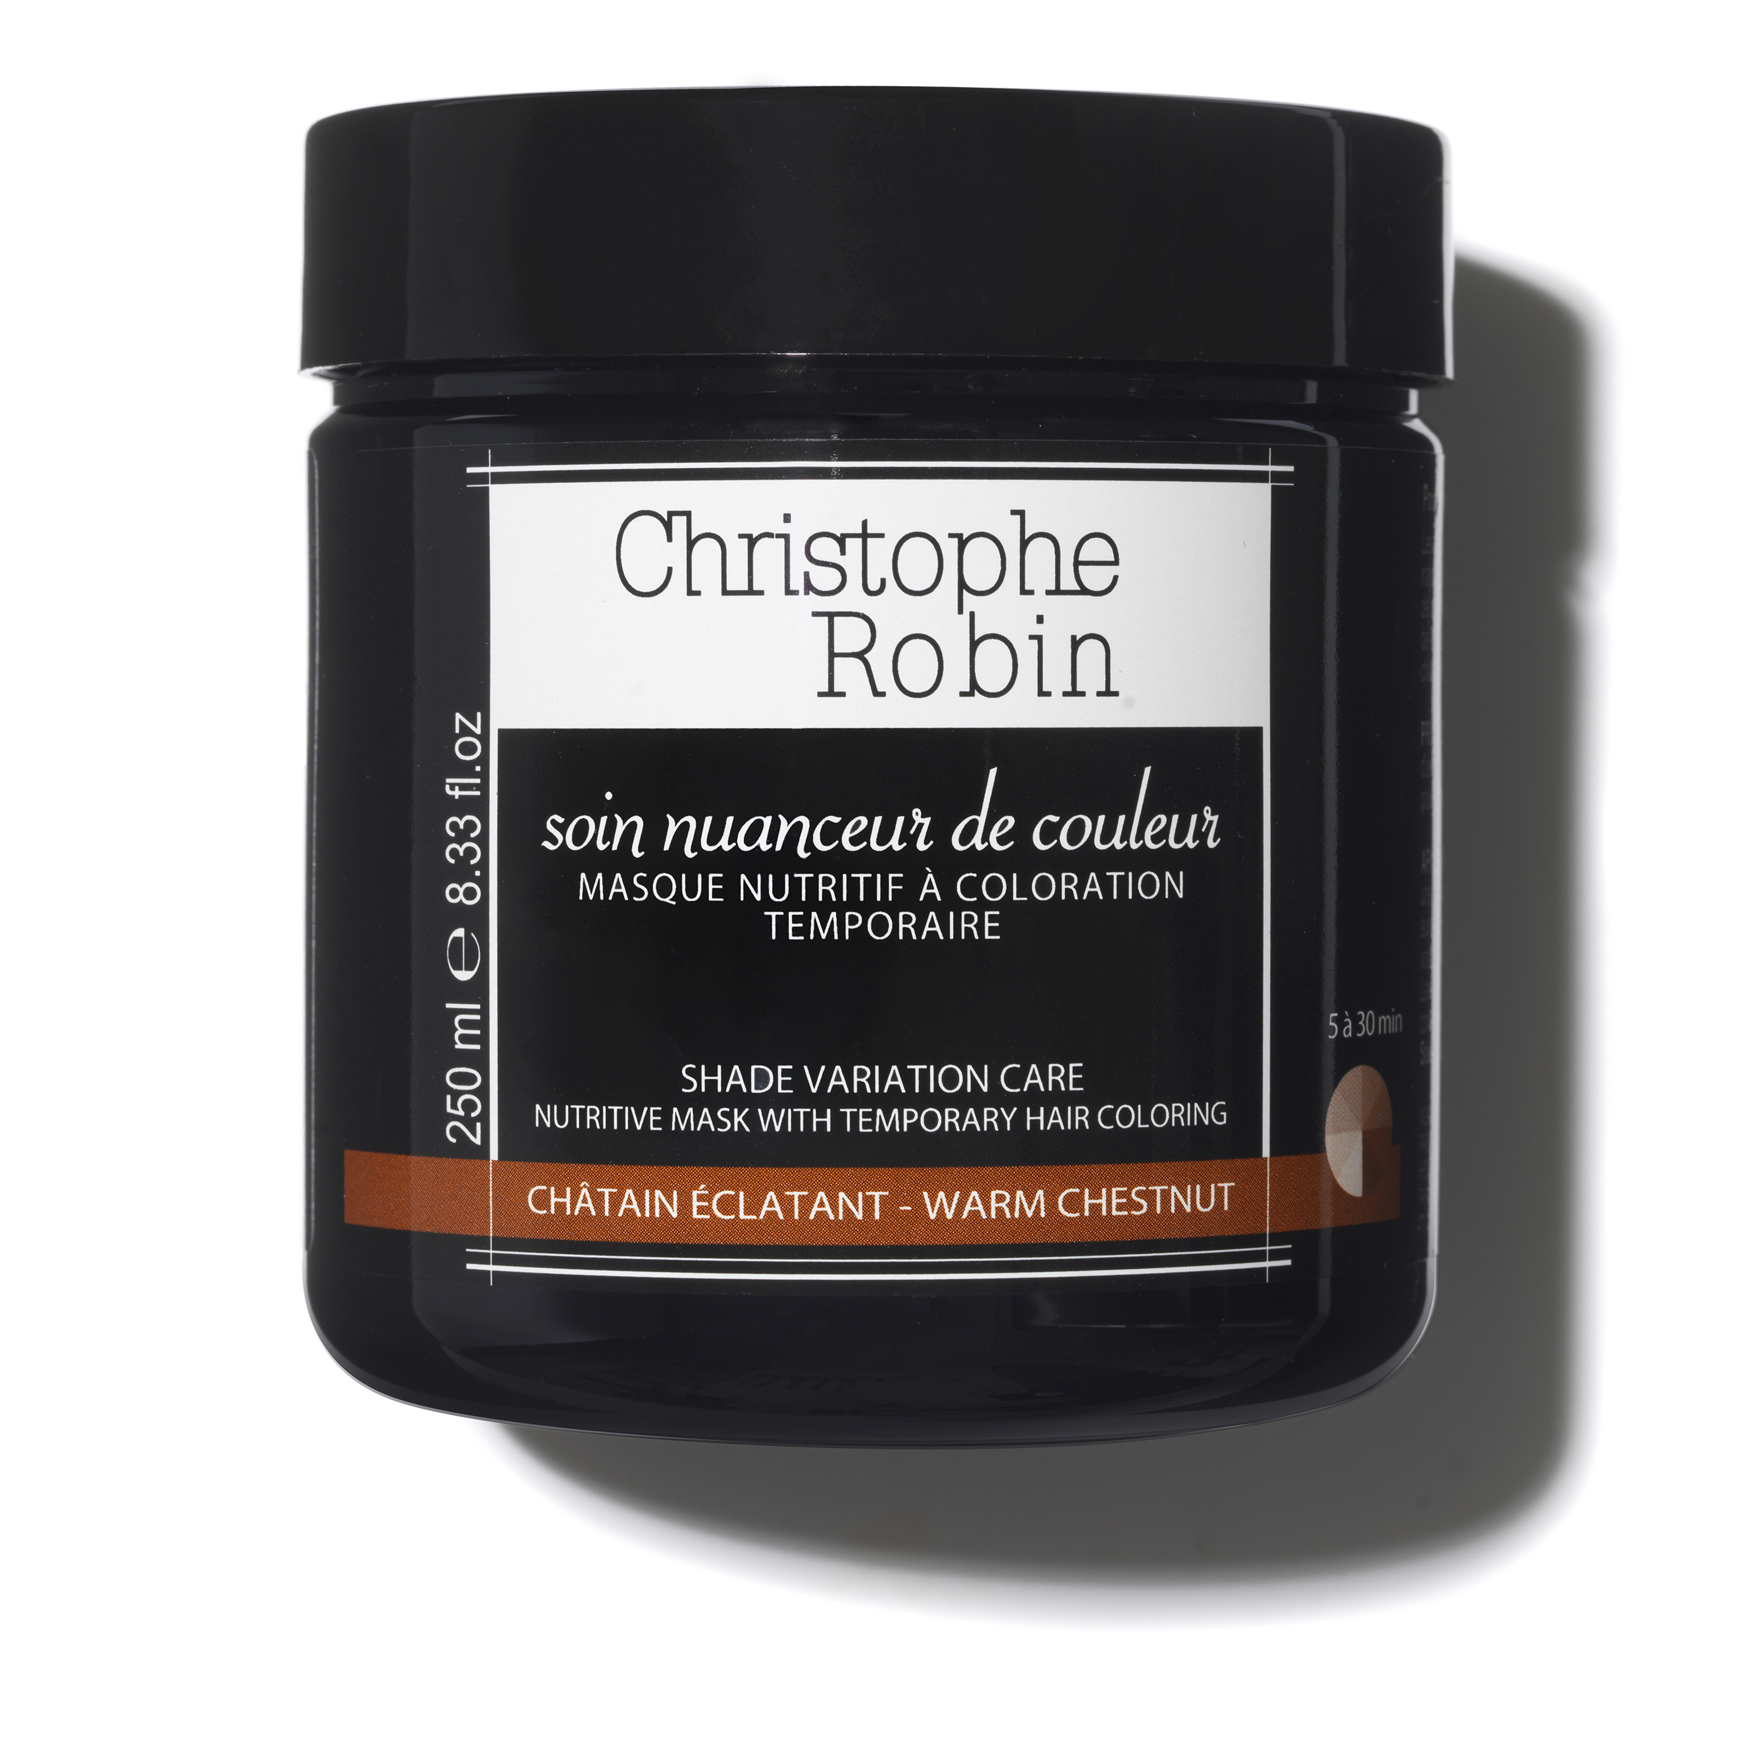 Christophe Robin Shade Variation Care Warm Chestnut | Space NK